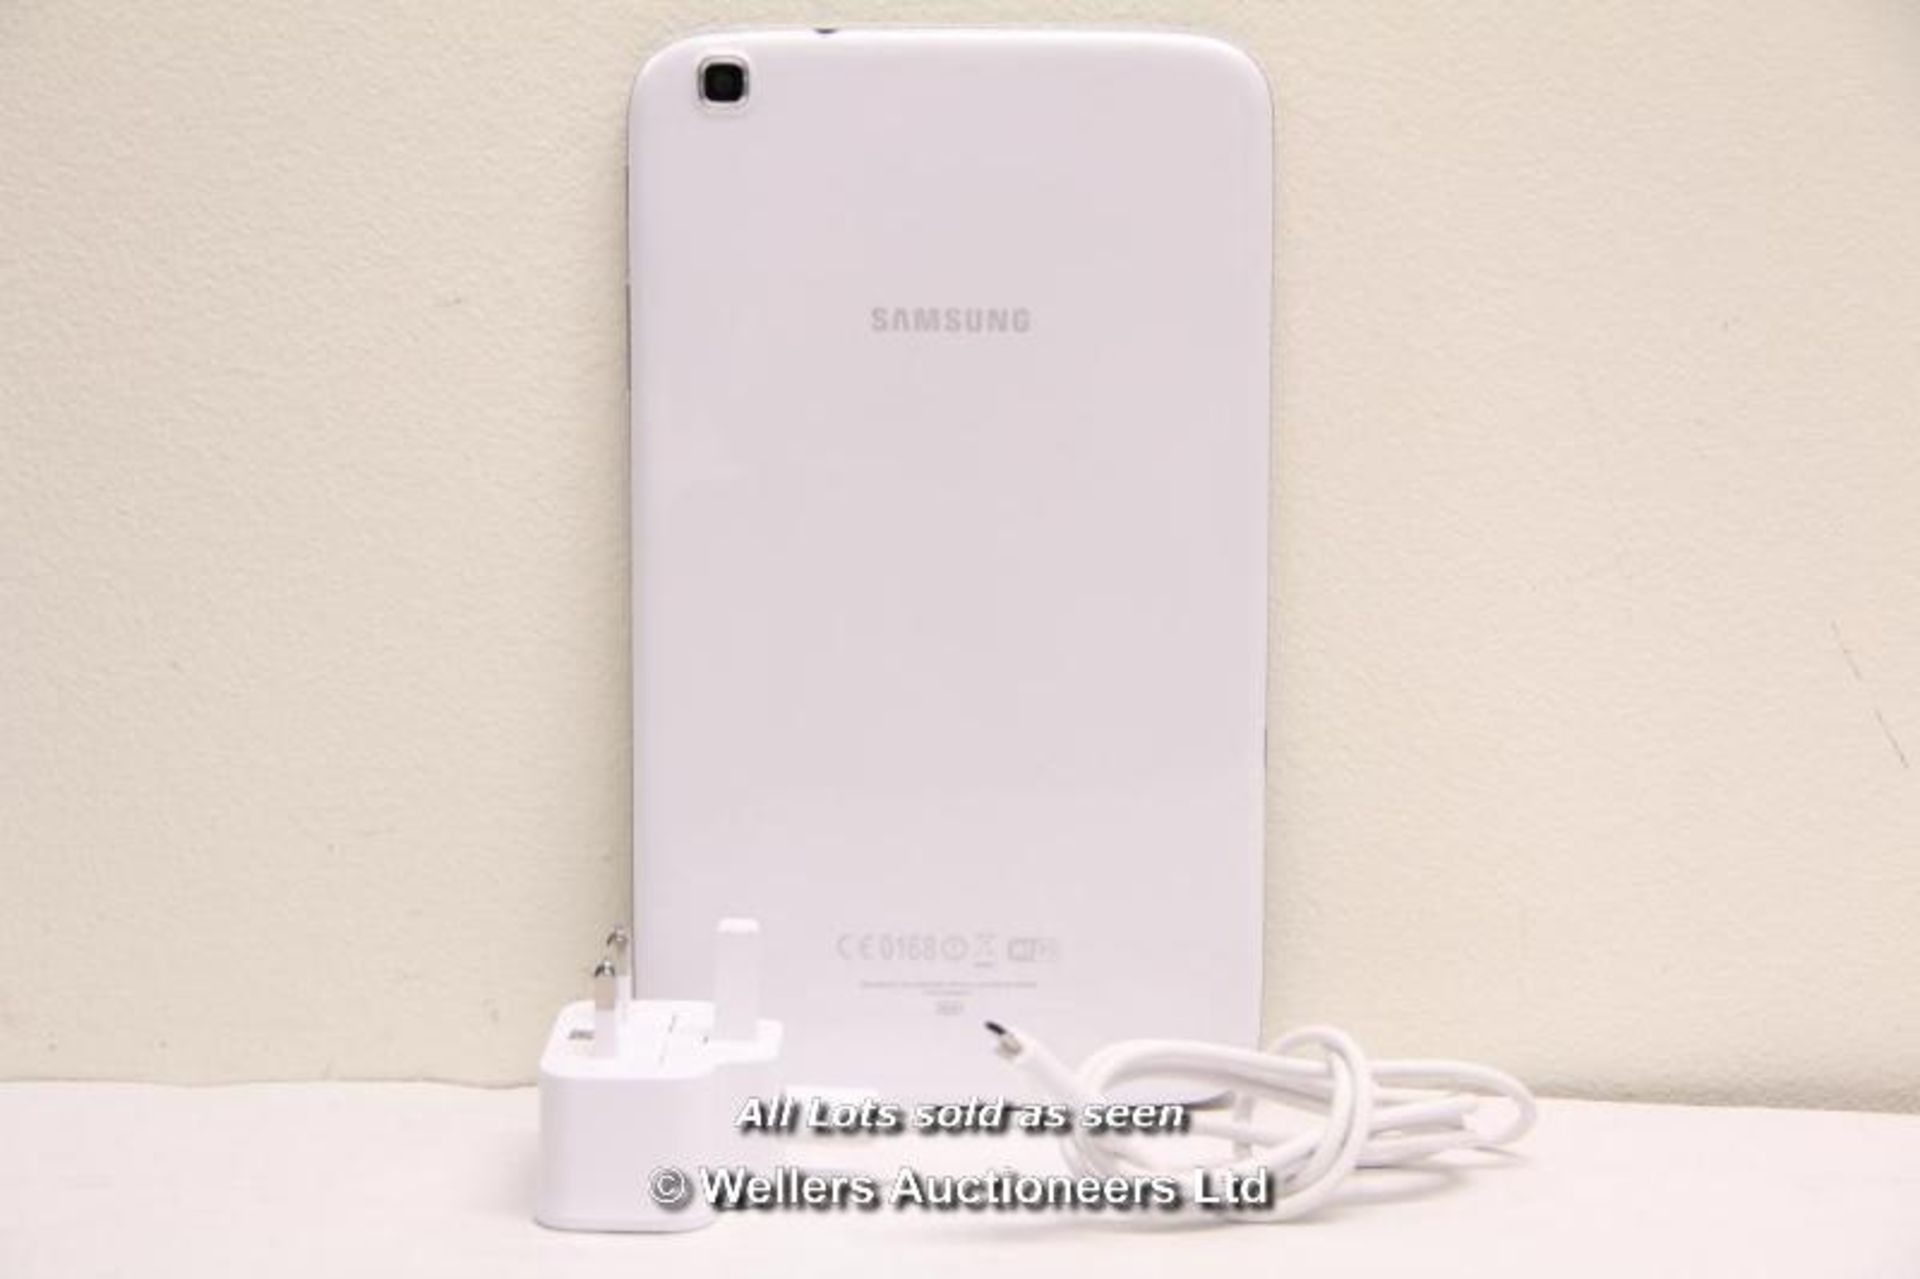 SAMSUNG GALAXY TAB 3 SM-T310 16GB WI-FI  8" - WHITE (36063949) / INCLUDING CHARGER AND USB CABLE / - Image 2 of 2